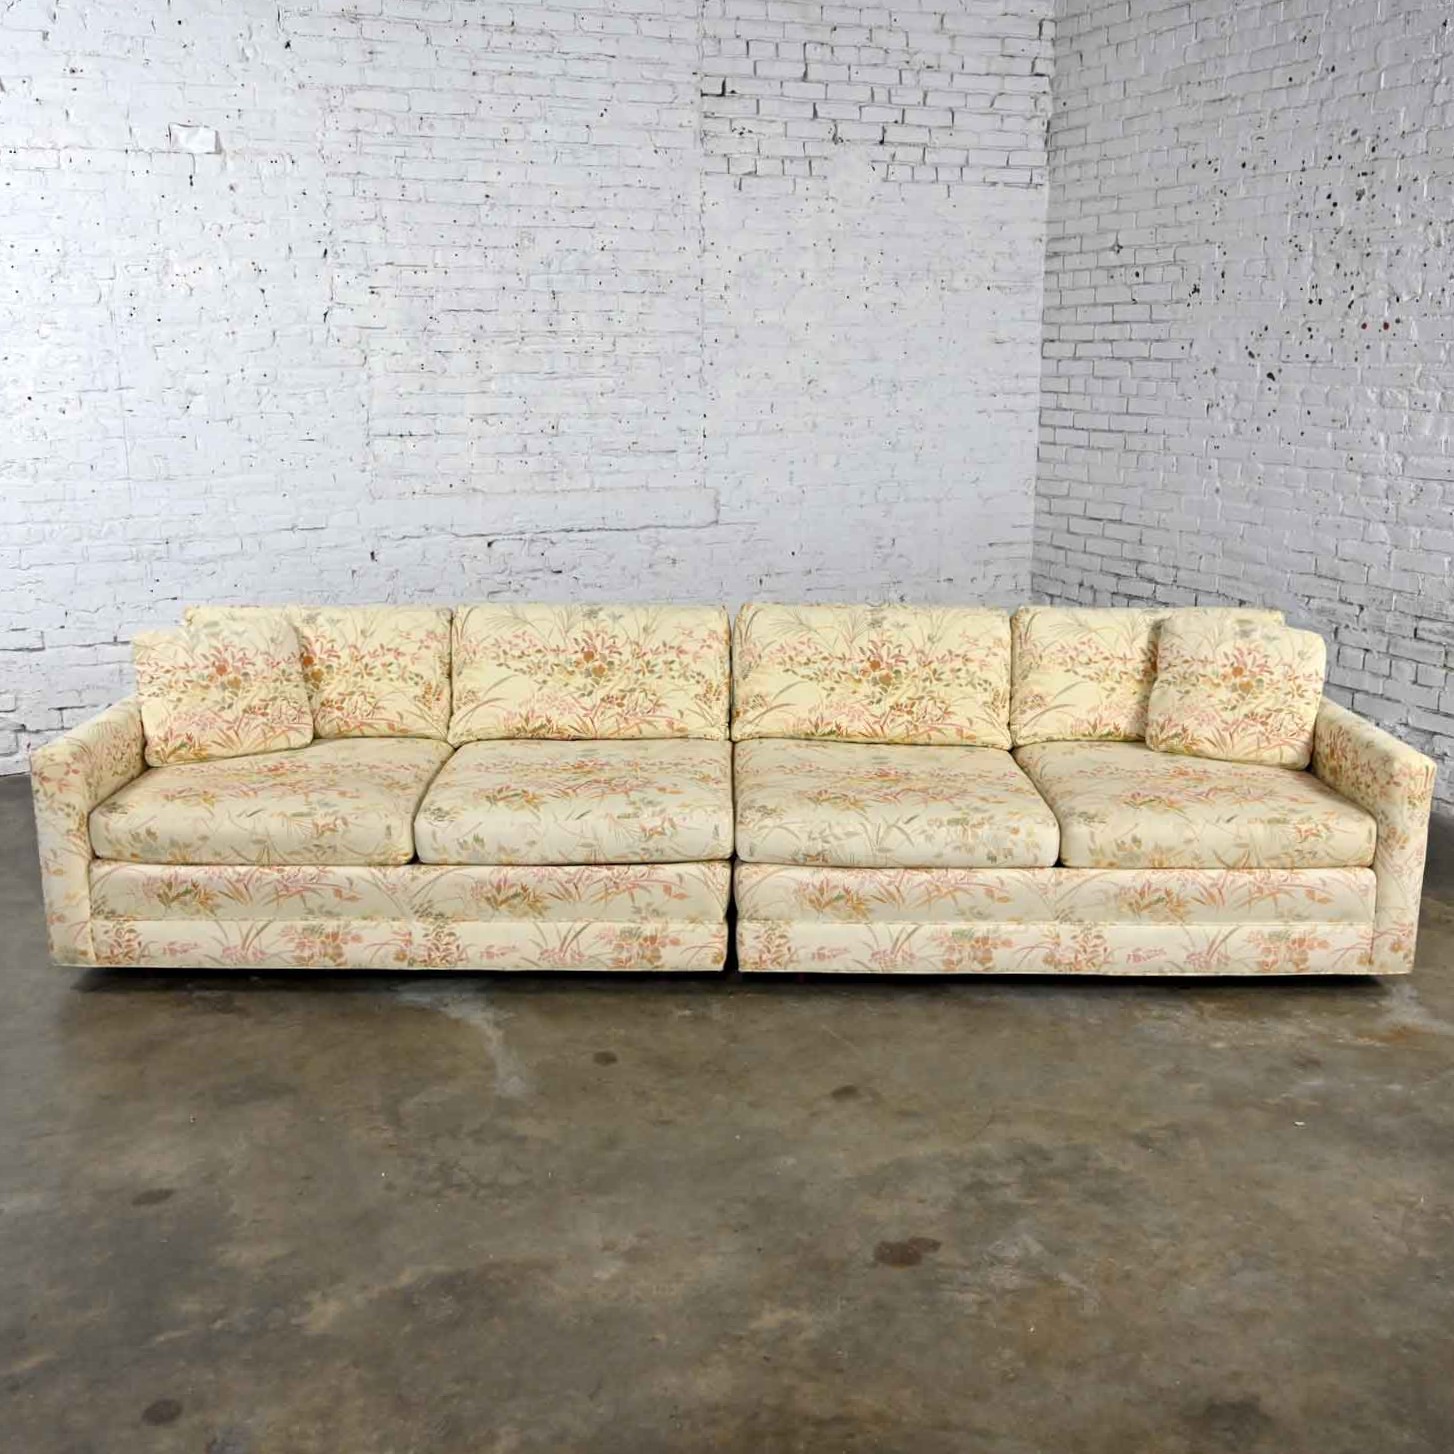 Vintage Mid-Century Modern 2 Piece Floral Sectional Sofa Style of Harvey Probber